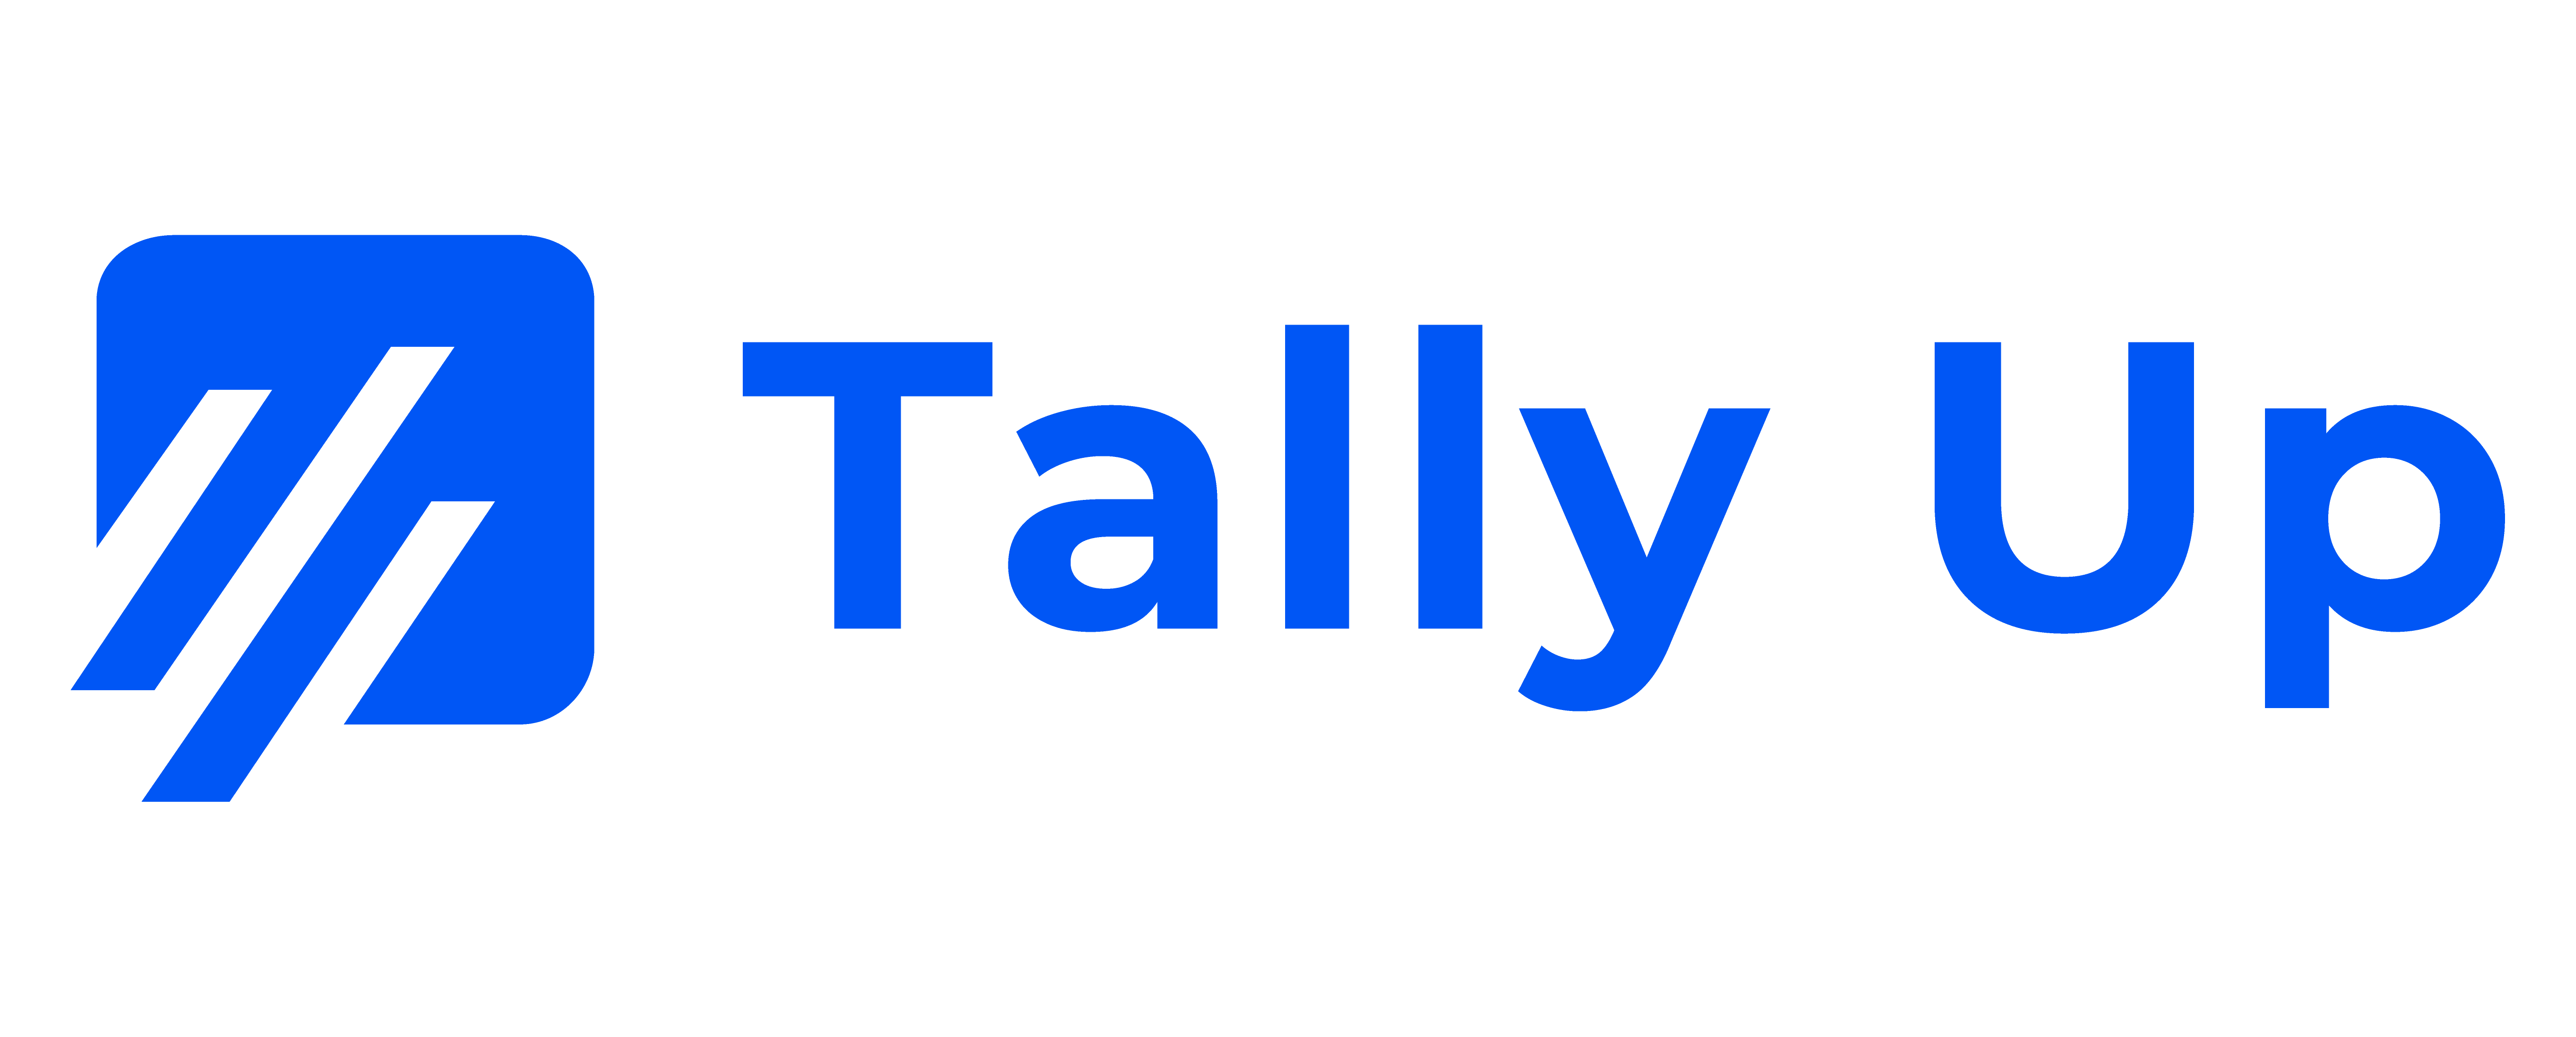 Find Twitter Influencers | Tally Up